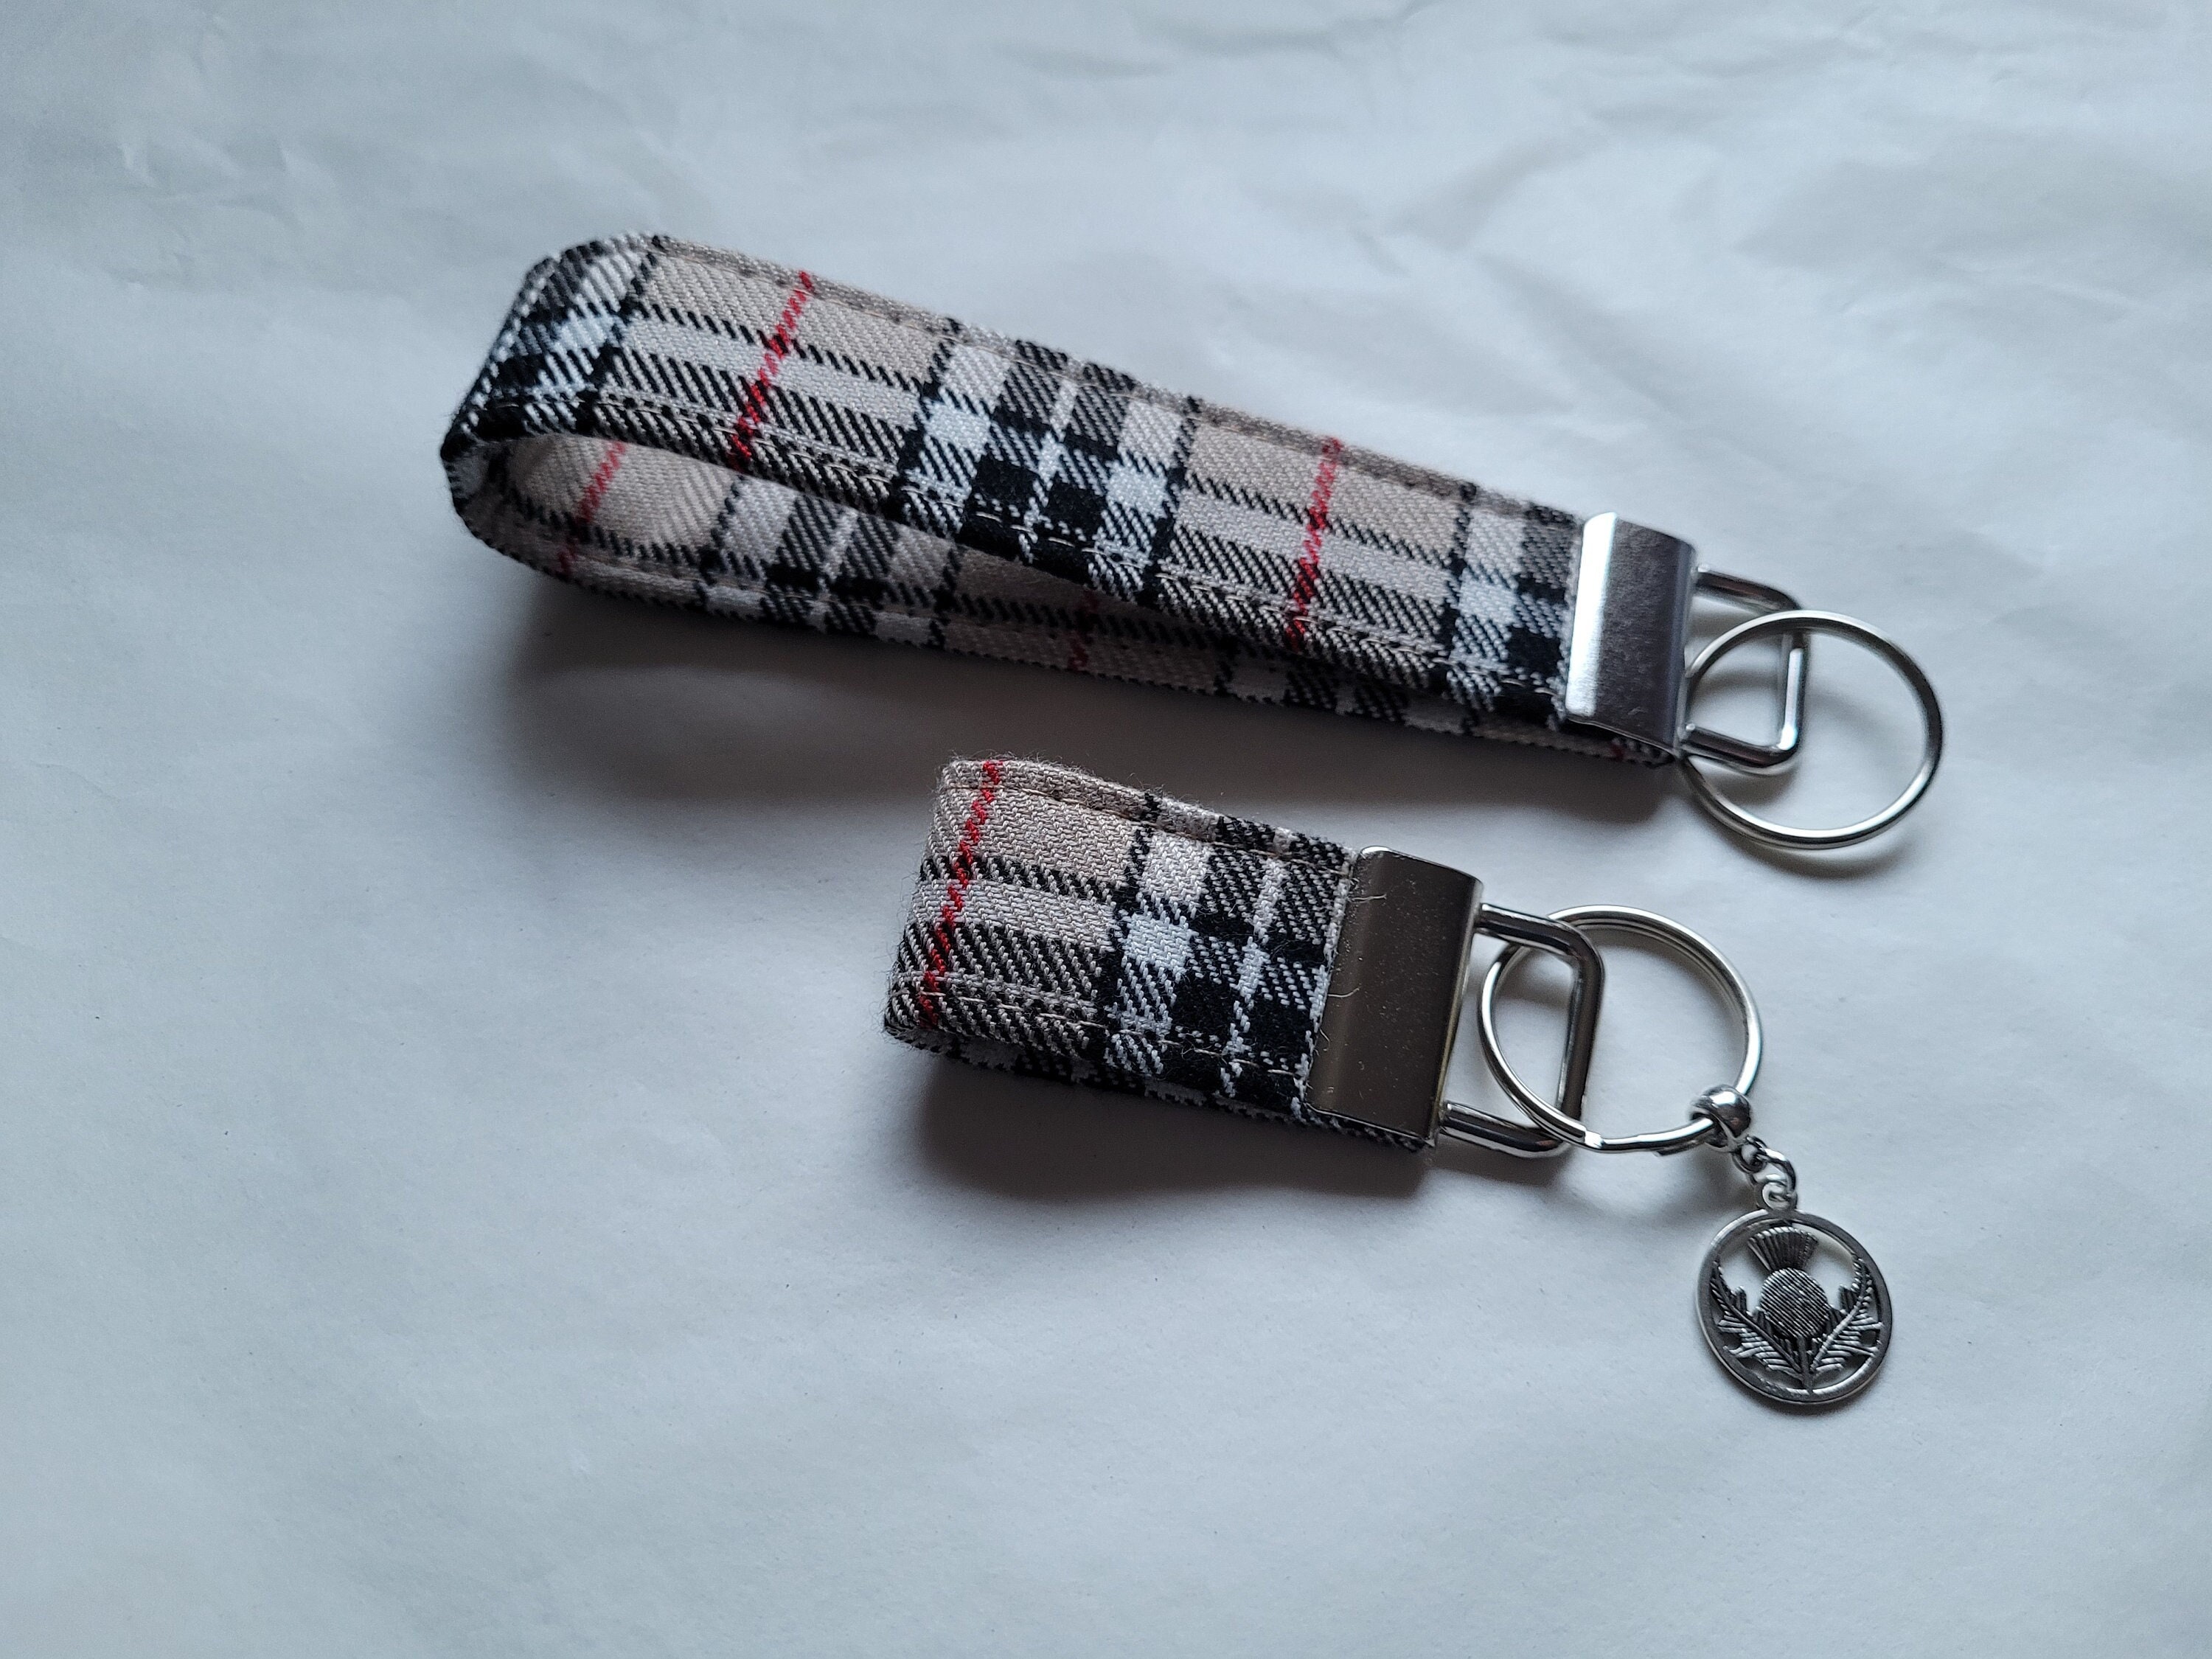 Burberry Poodle Eco Leather Keychain